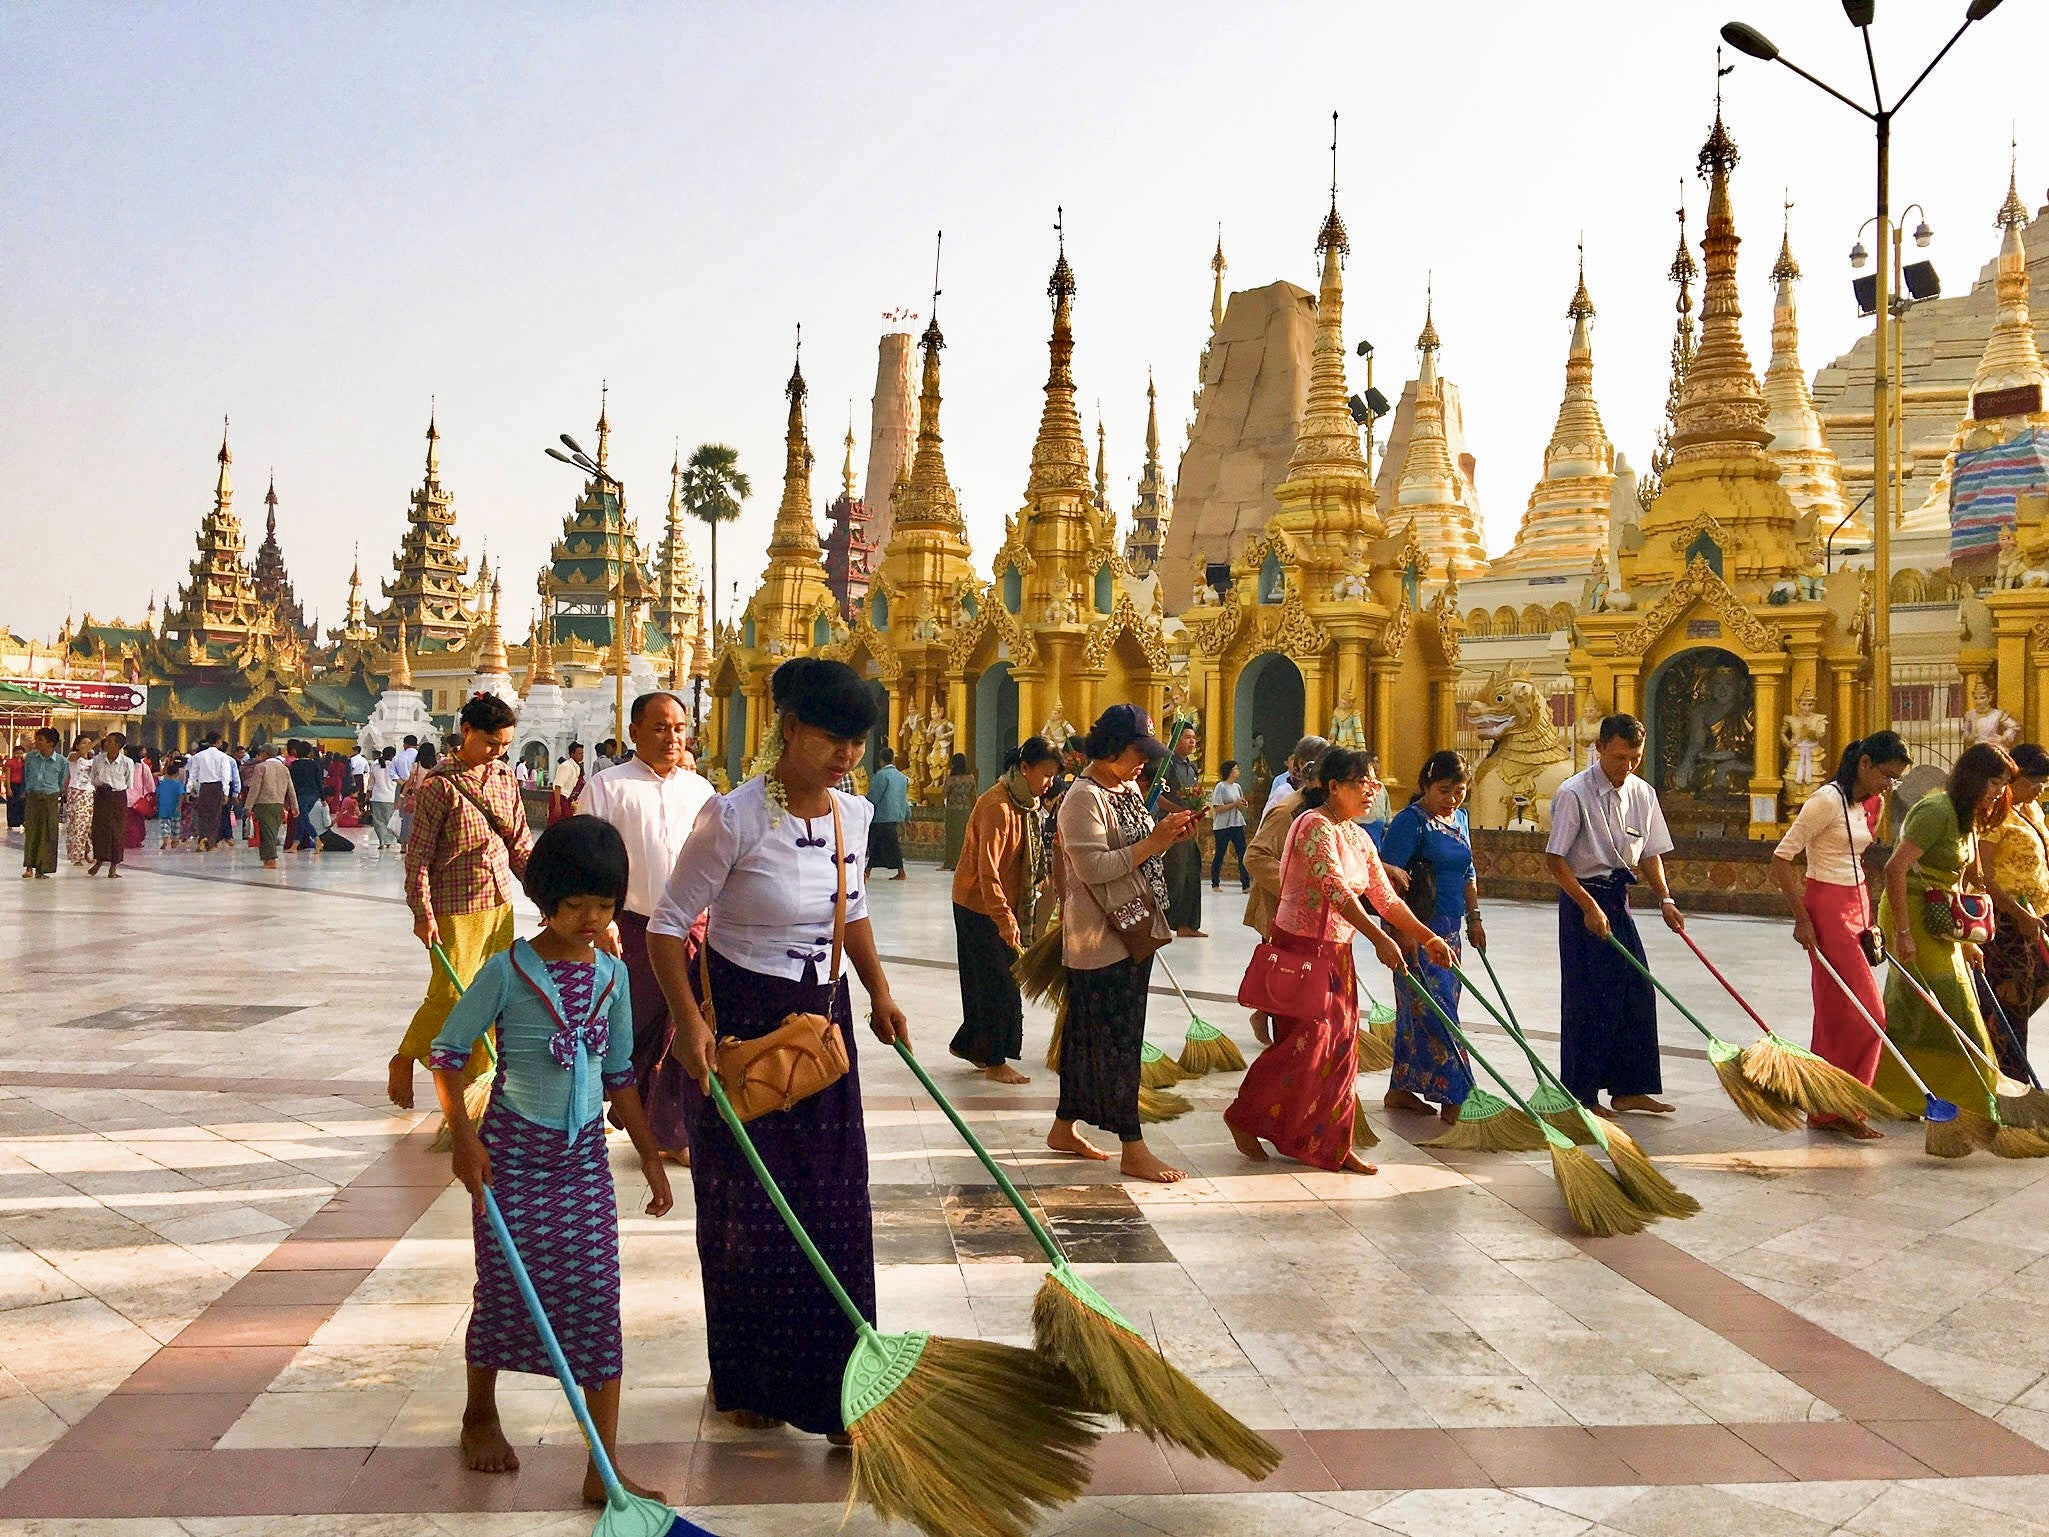 Amidst a crowd, volunteers meticulously sweep the vast marble terrace with large round brooms against a backdrop golden pagodas